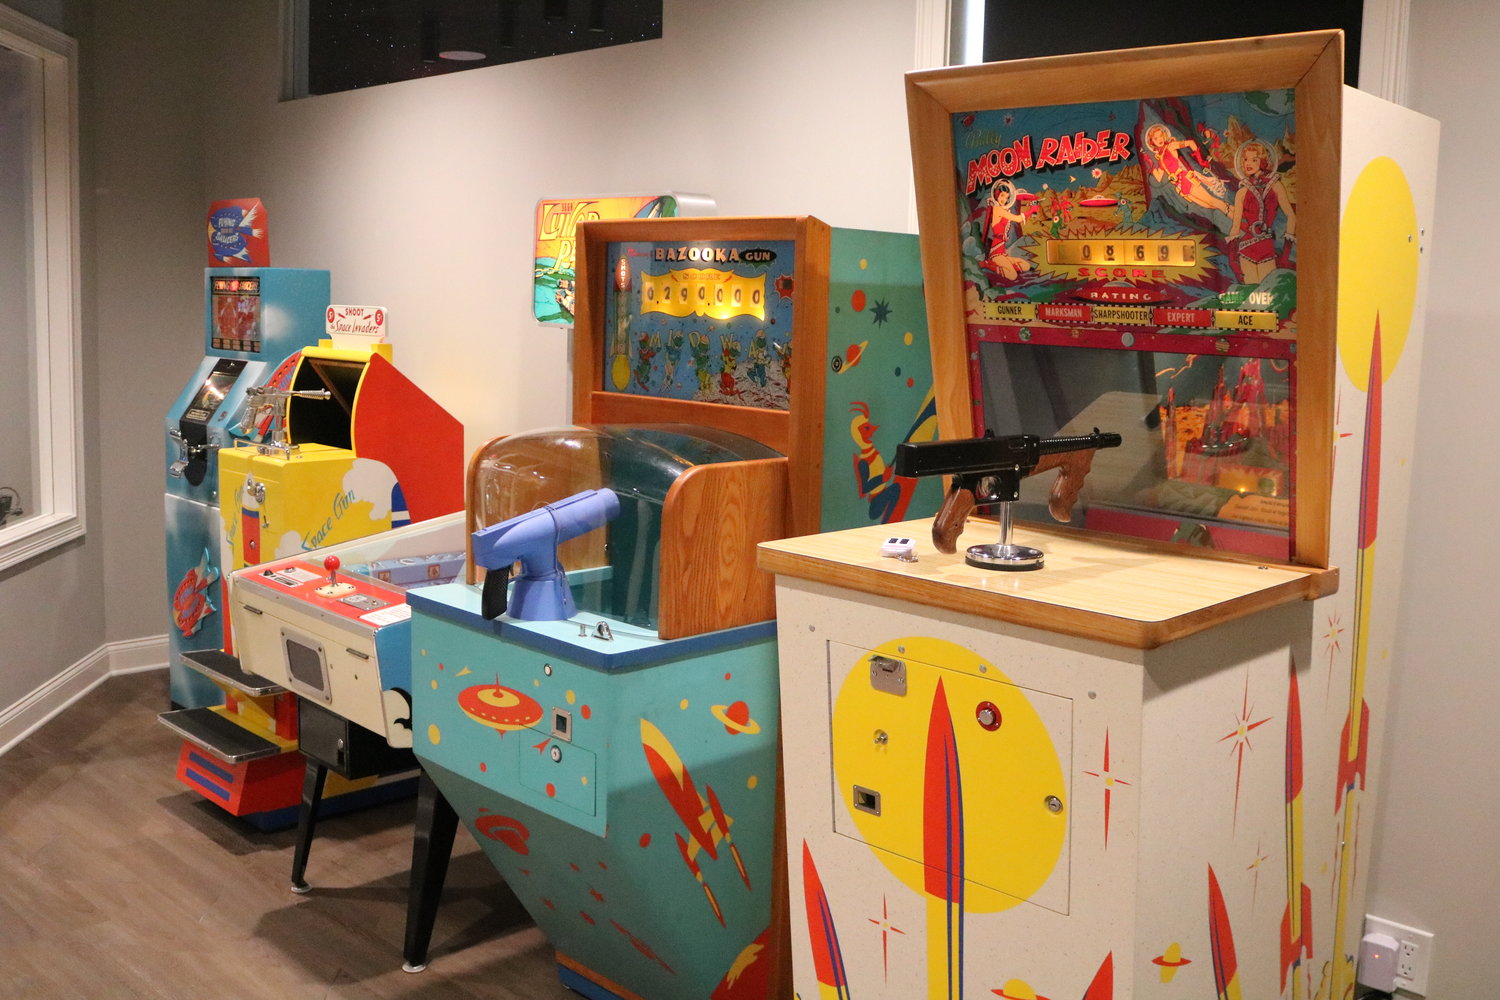 Vintage arcade machines add to the collection’s unique vibe.